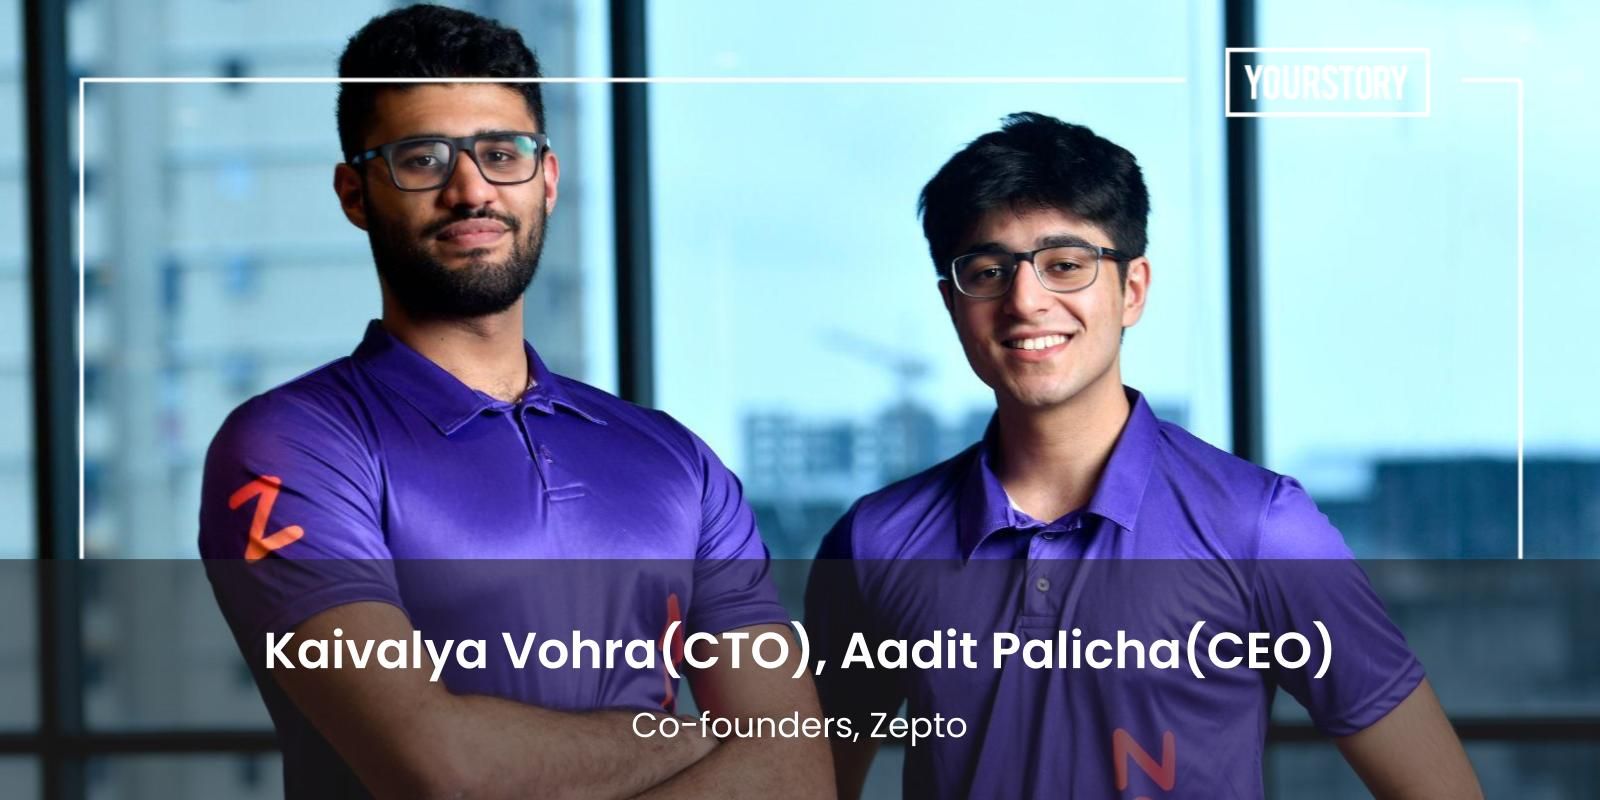 This startup by two 19-year-old Stanford dropouts is disrupting the grocery delivery space